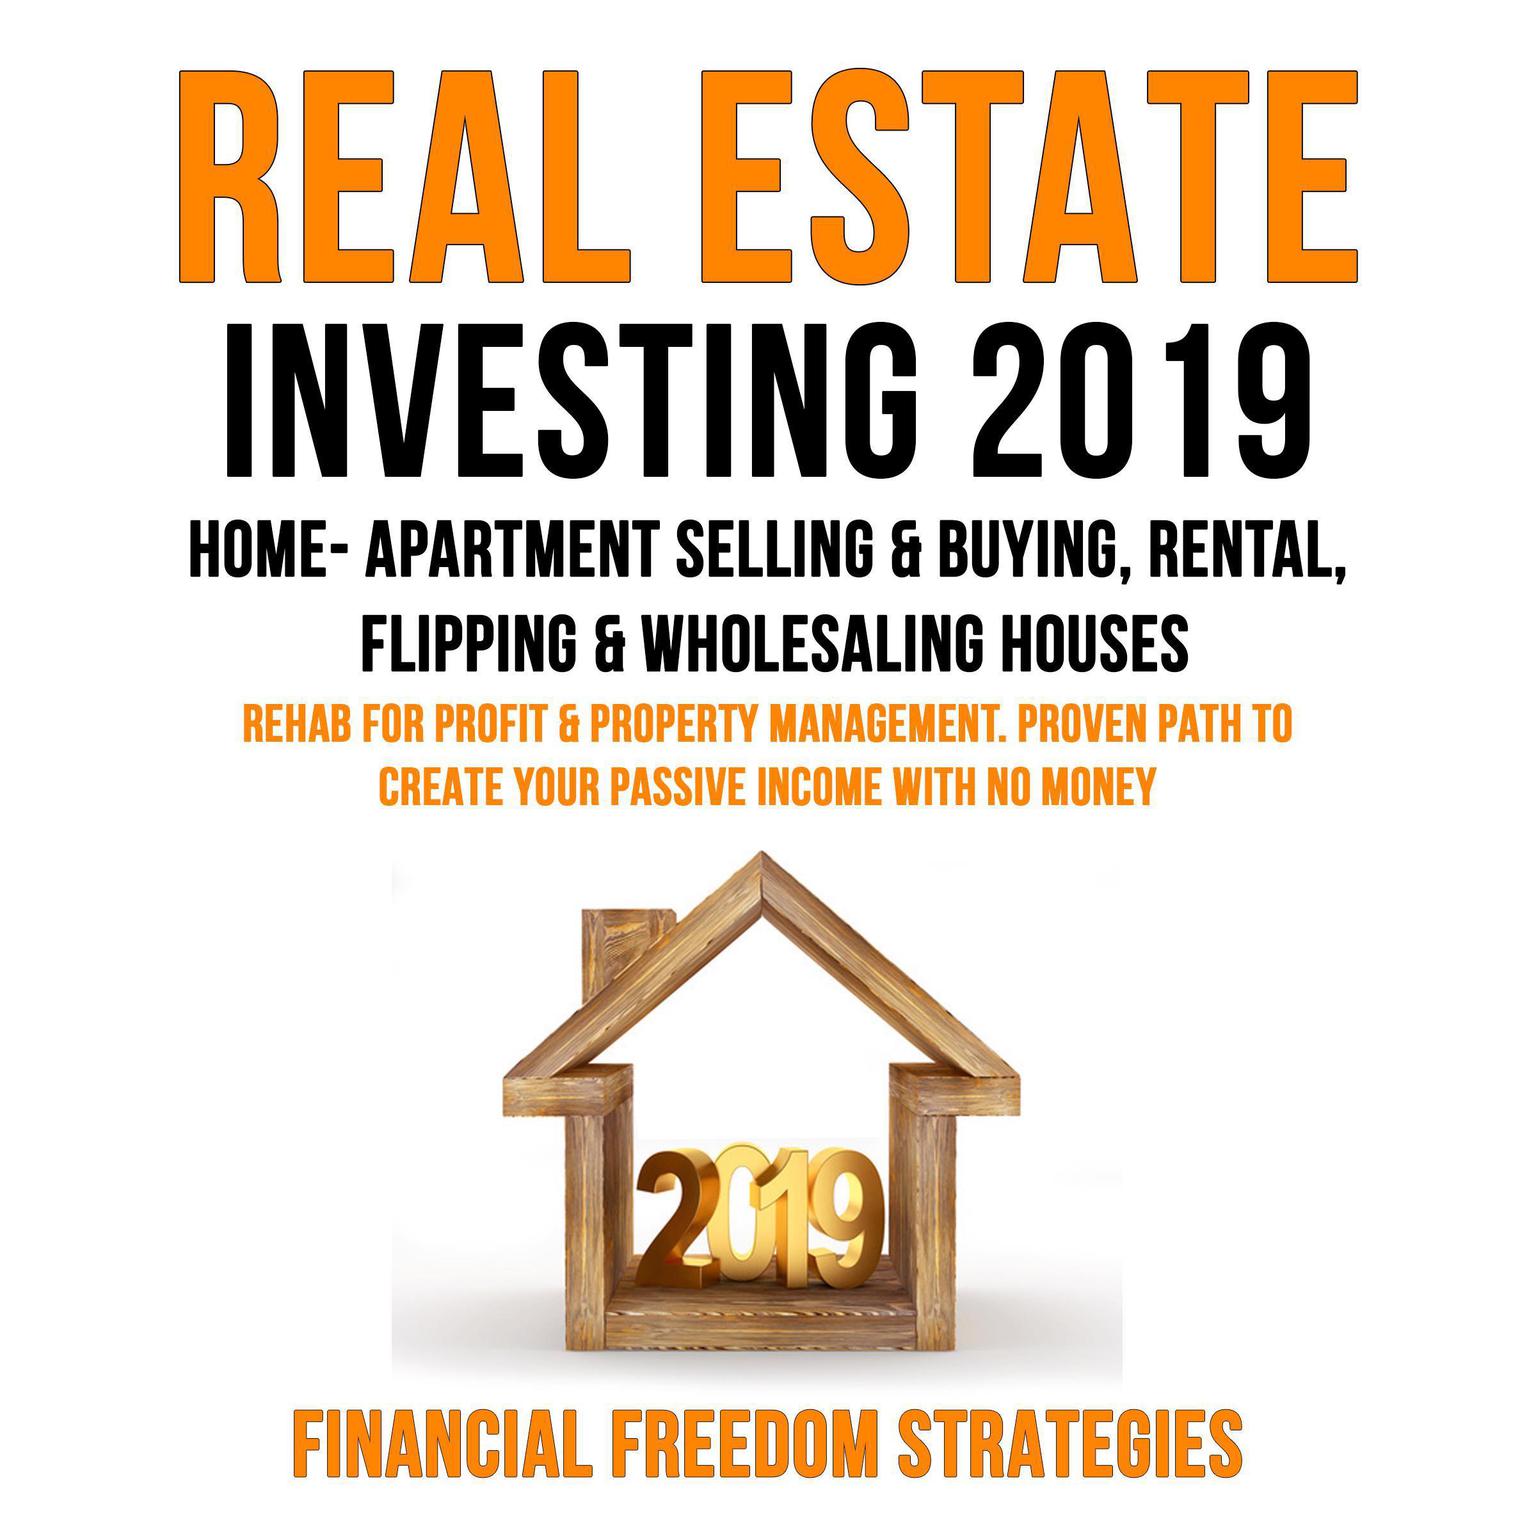 REAL ESTATE INVESTING 2019: : HOME- APARTMENT SELLING & BUYING, RENTAL, FLIPPING & WHOLESALING HOUSES: REHAB FOR PROFIT & PROPERTY MANAGEMENT BUSINESS. PROVEN PATH TO CREATE YOUR PASSIVE INCOME WITH NO MONEY (Financial Freedom Strategies Book 1) Audiobook, by Financial Freedom Strategies